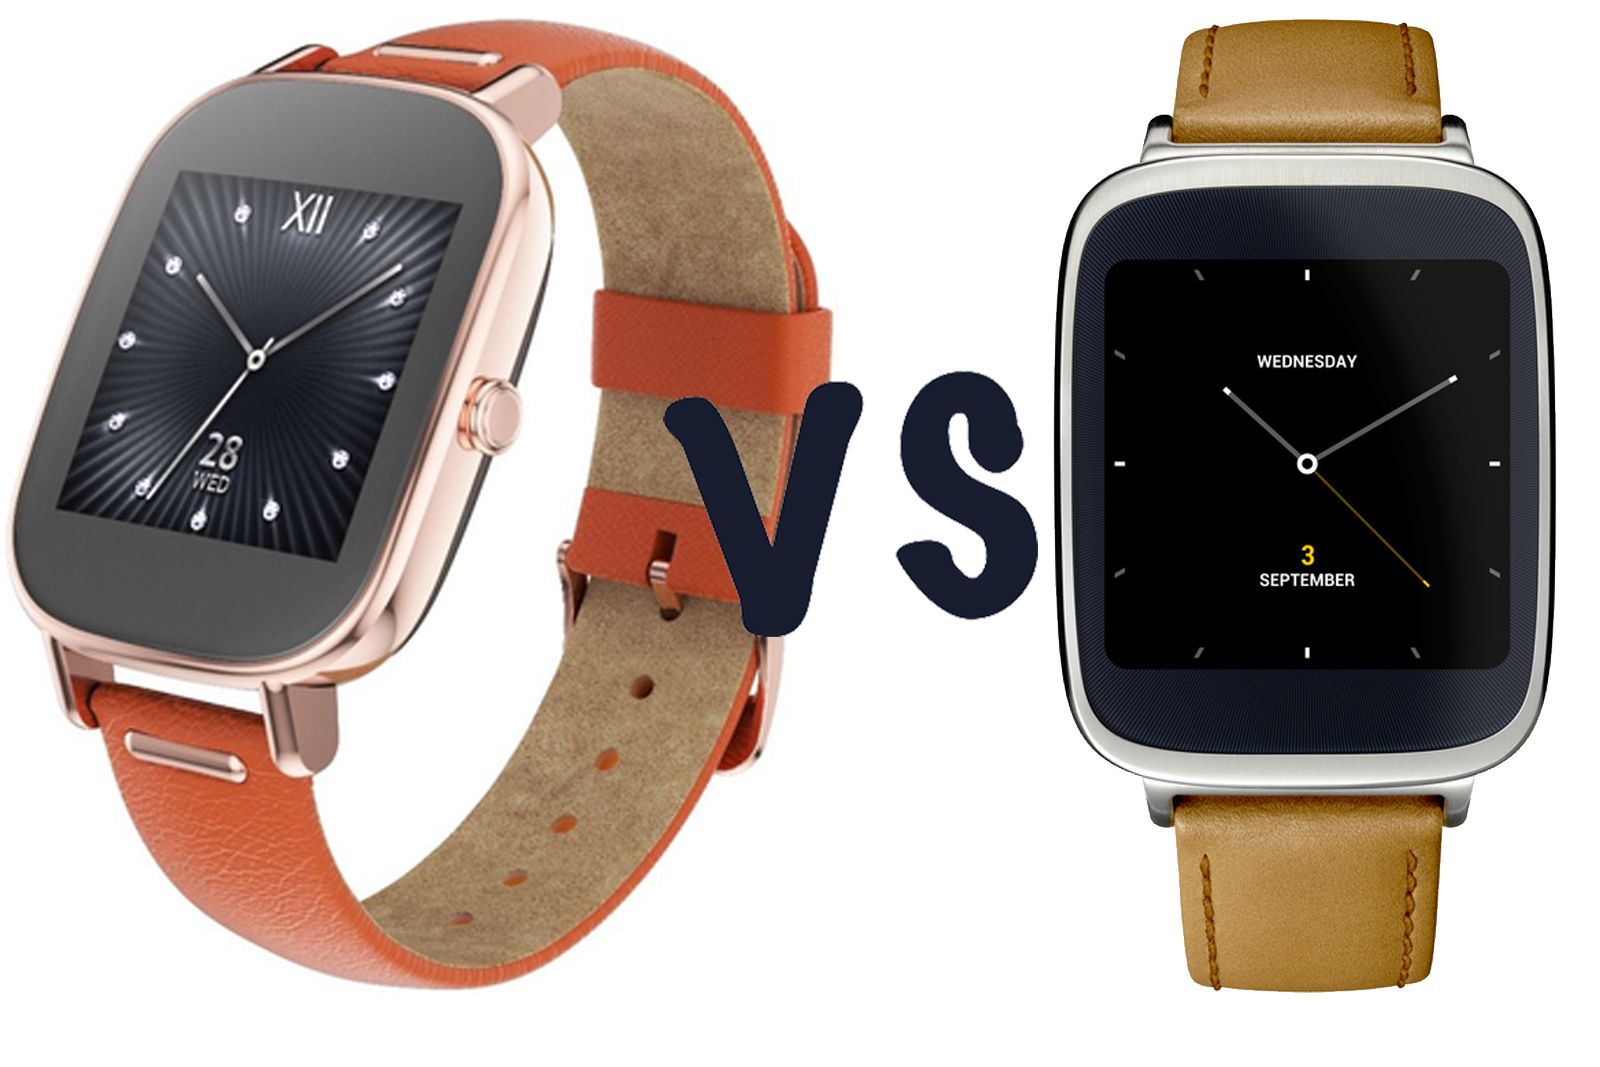 asus zenwatch 2 vs asus zenwatch what s the difference  image 1